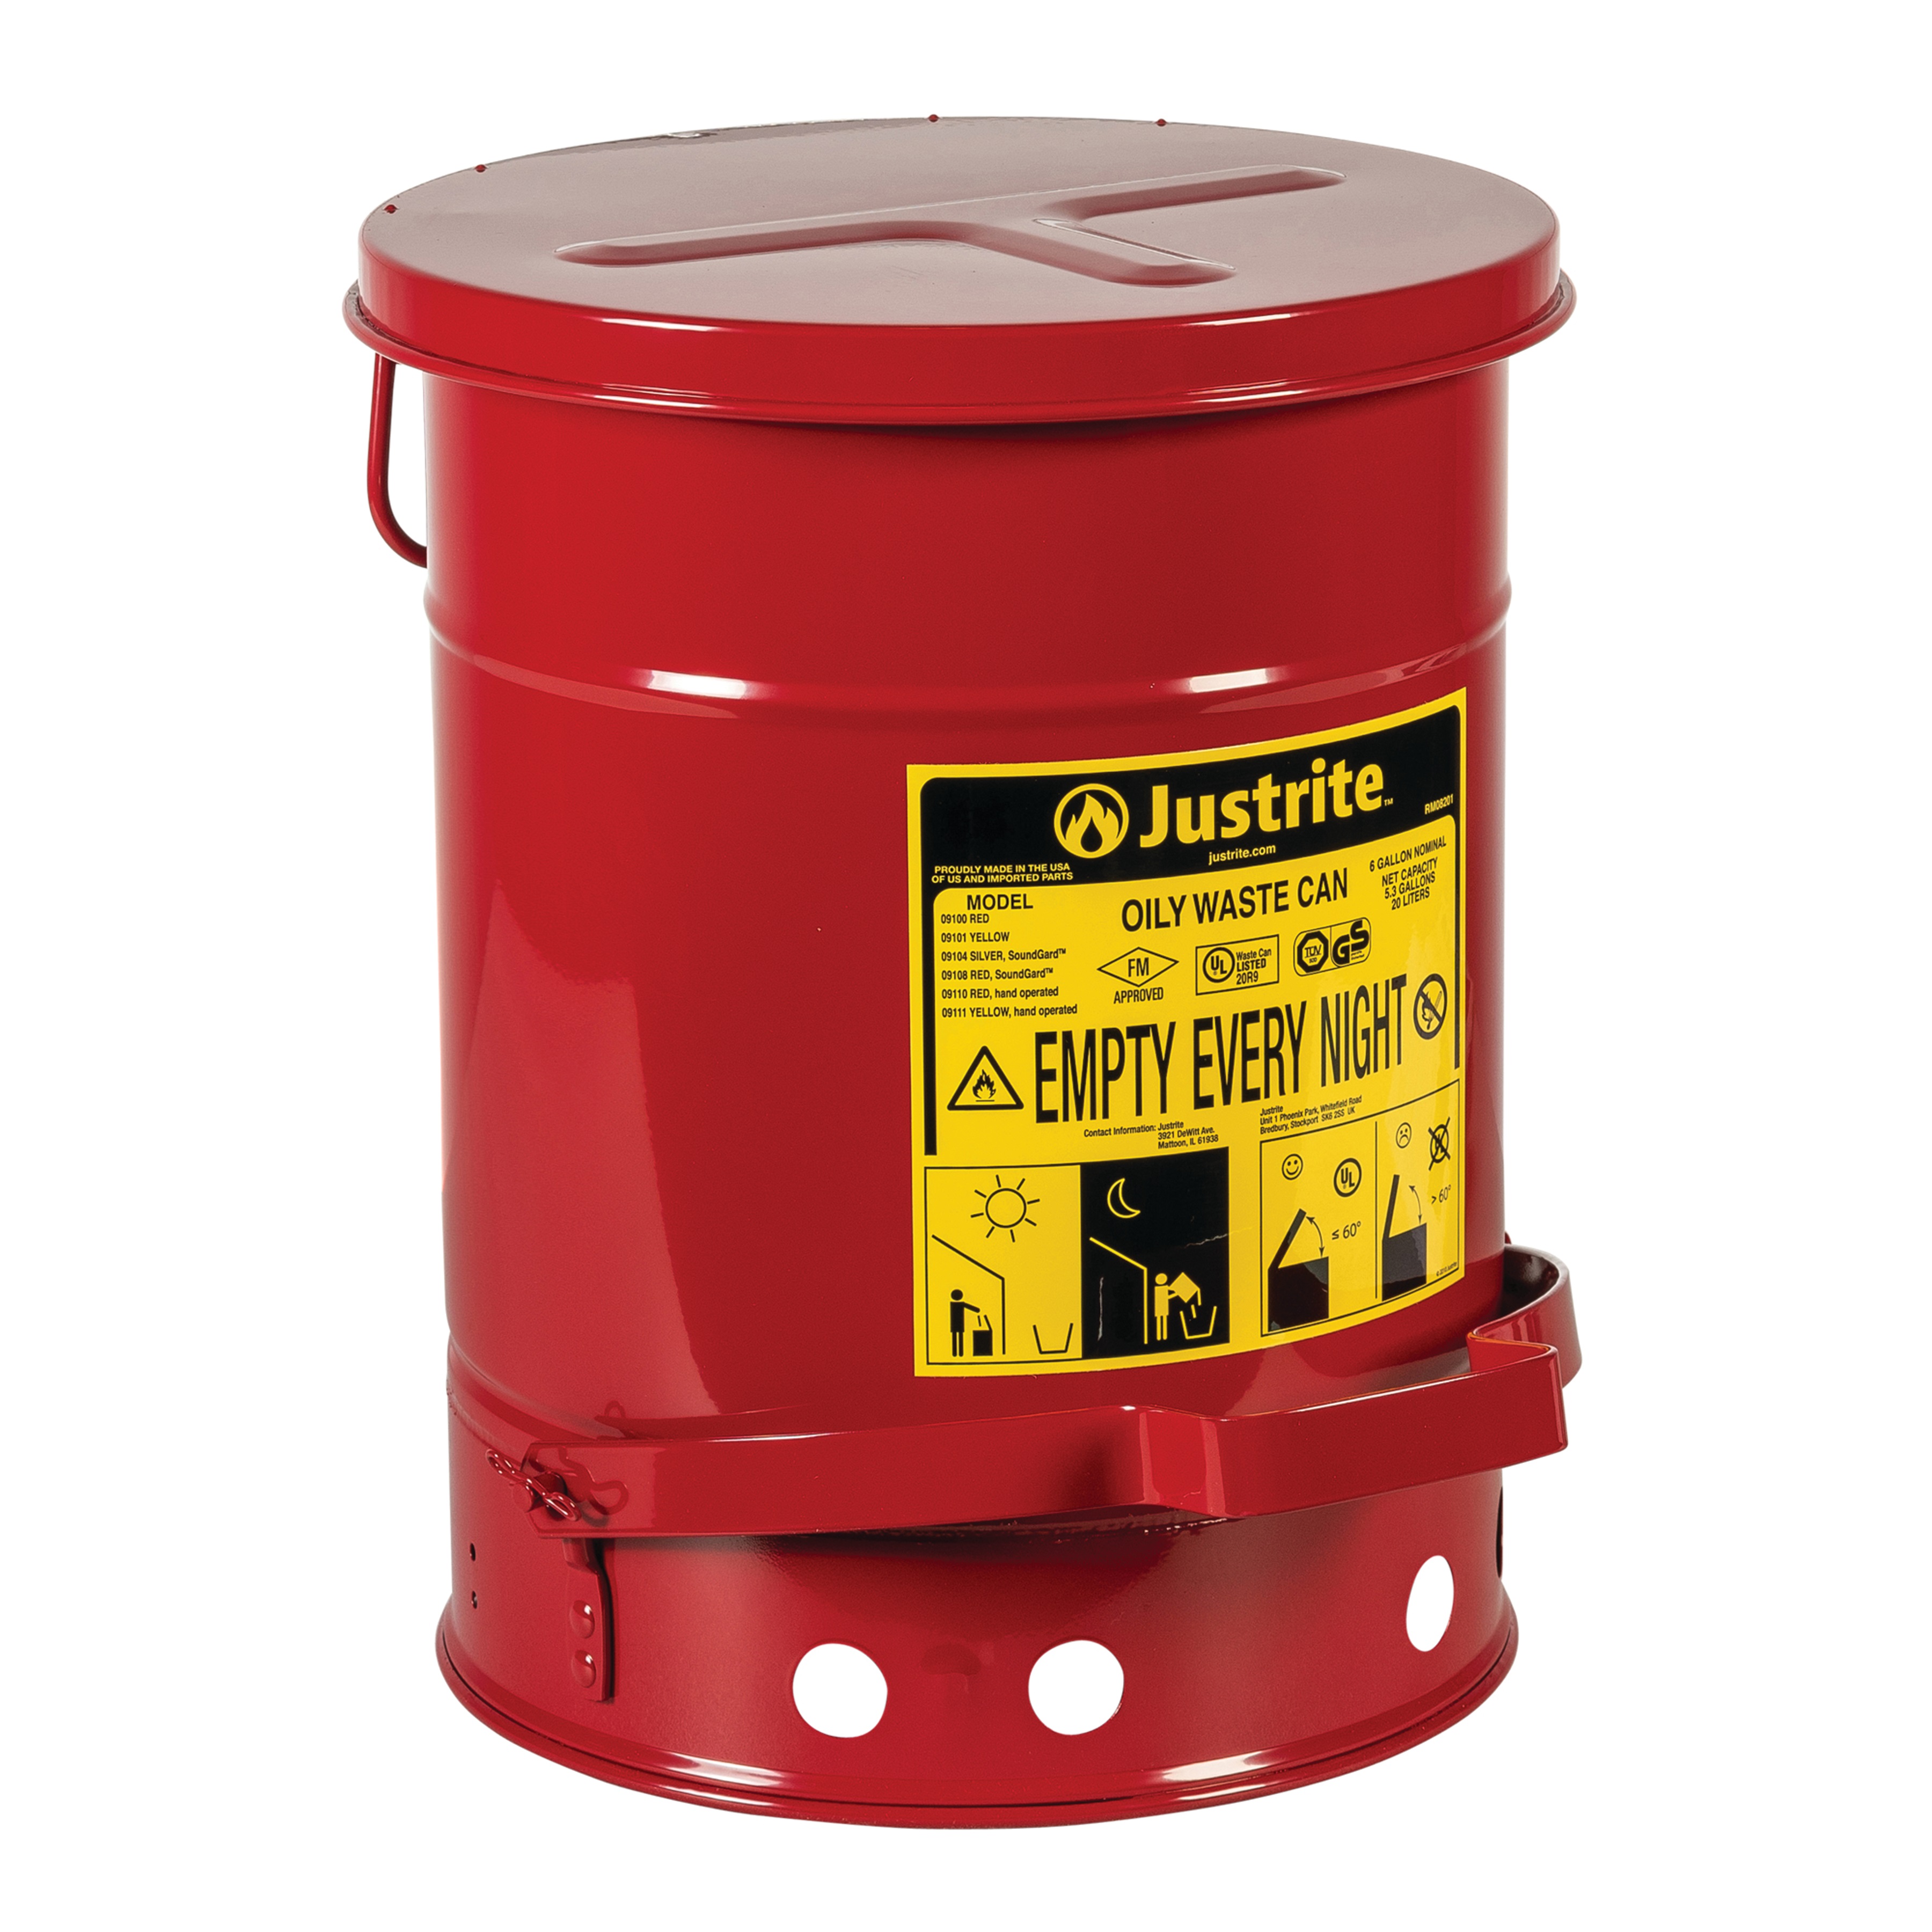 Justrite Oily Waste Cans - Red - Foot Operated